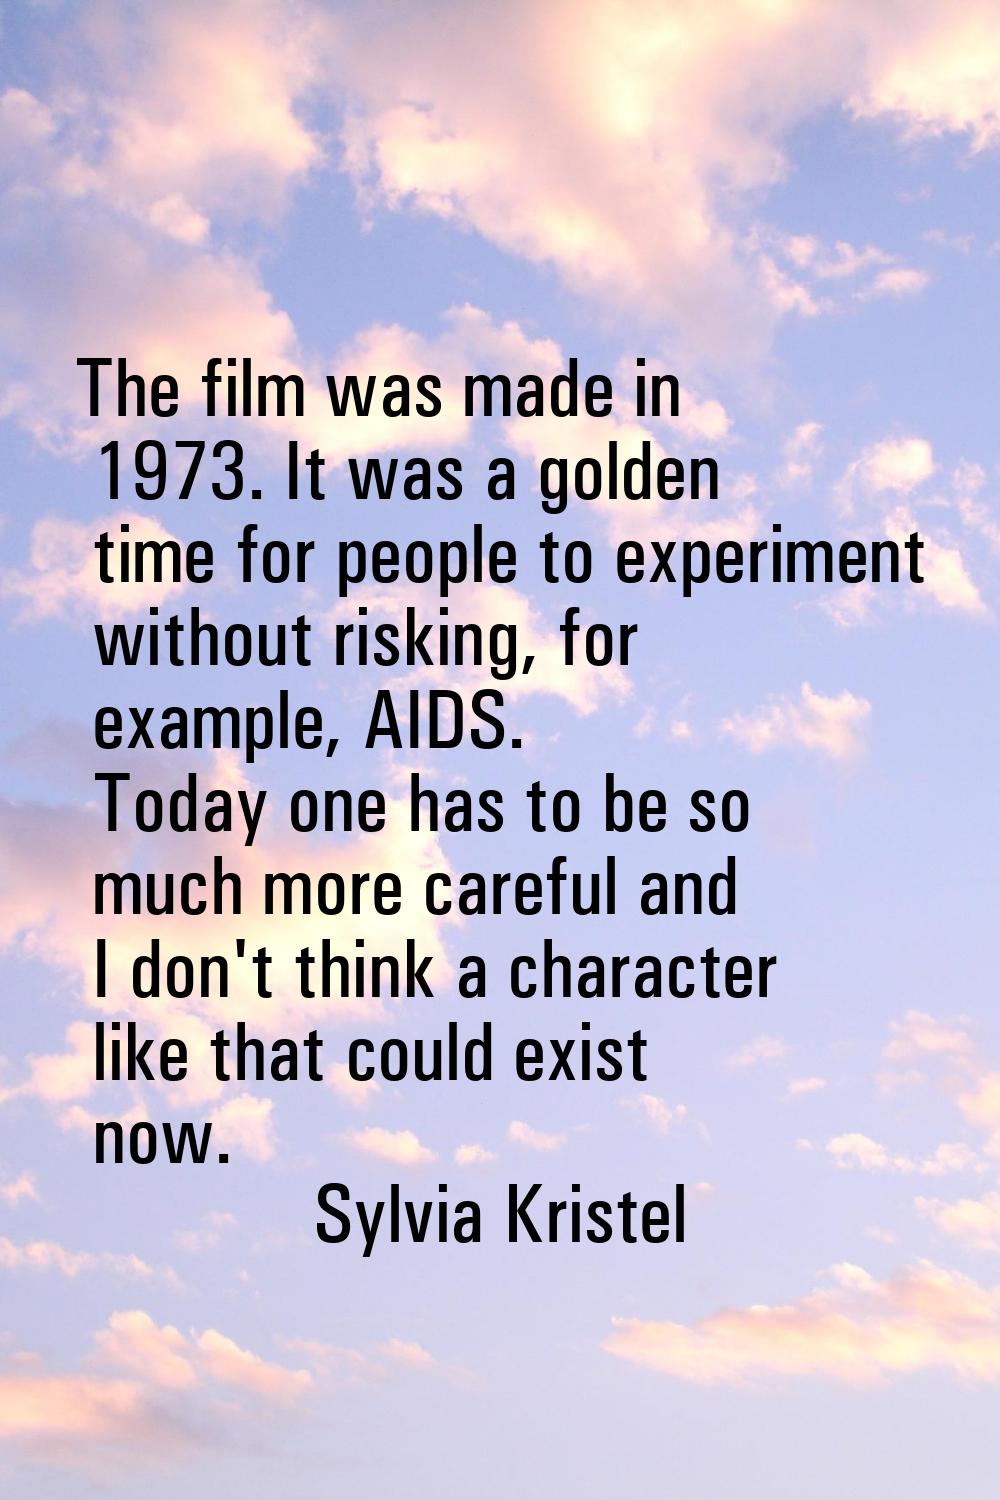 The film was made in 1973. It was a golden time for people to experiment without risking, for examp